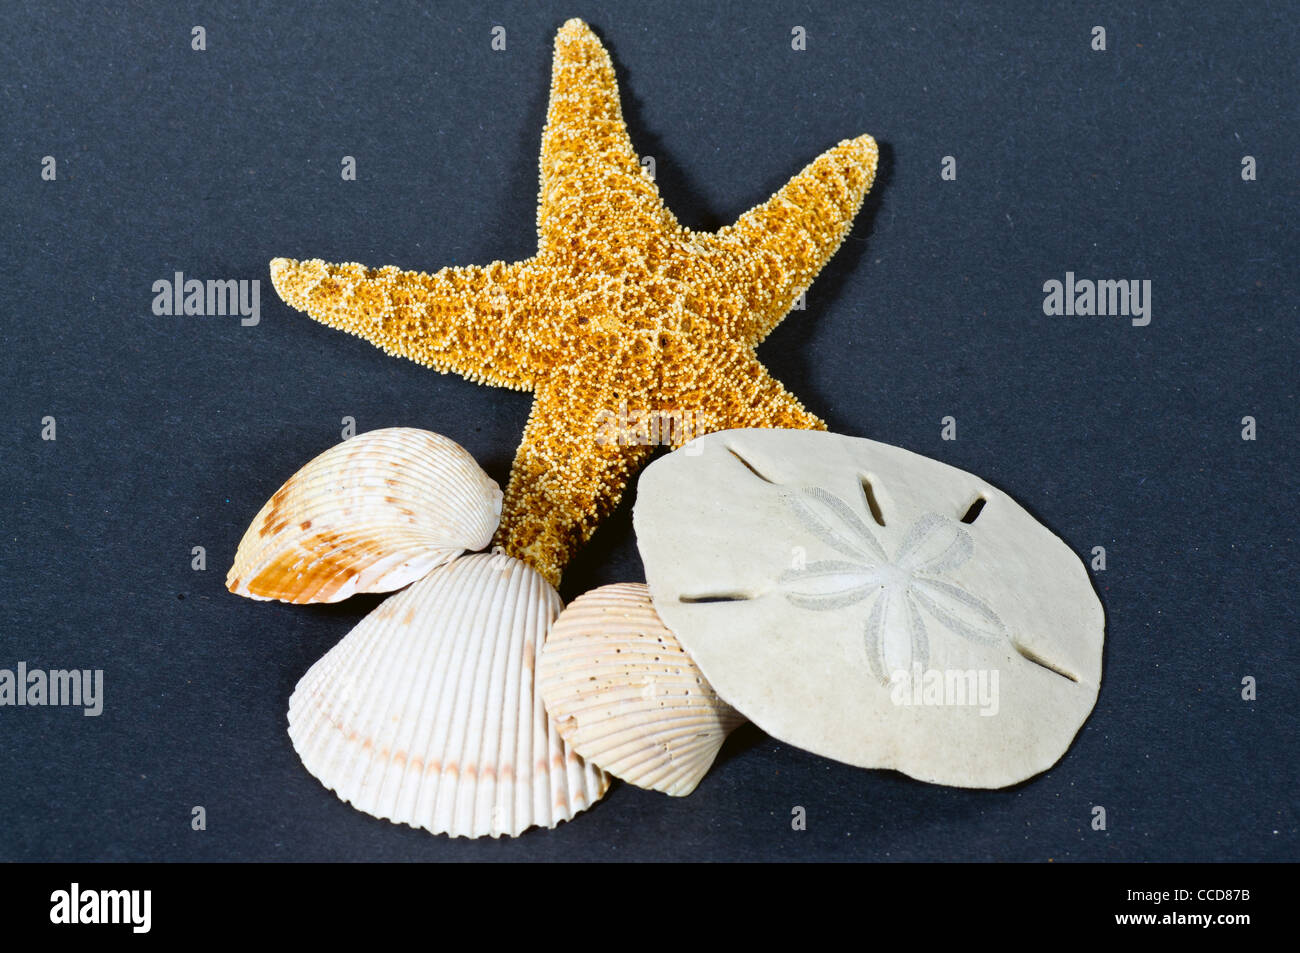 closeup of a group of Starfish shells and sand dollar on a dark background Stock Photo